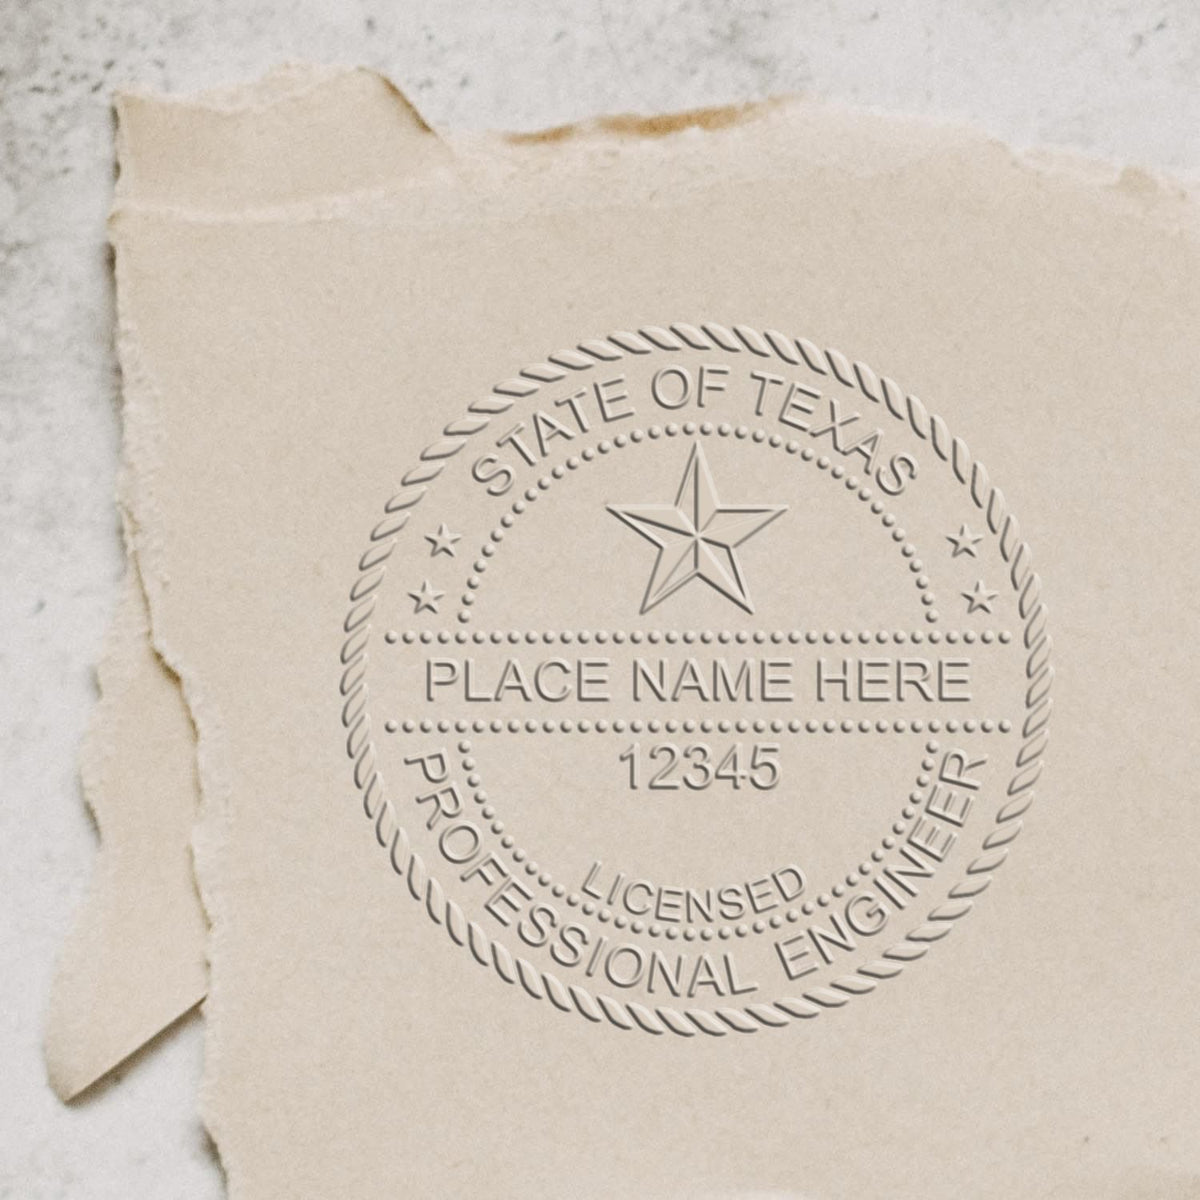 A stamped impression of the Soft Texas Professional Engineer Seal in this stylish lifestyle photo, setting the tone for a unique and personalized product.